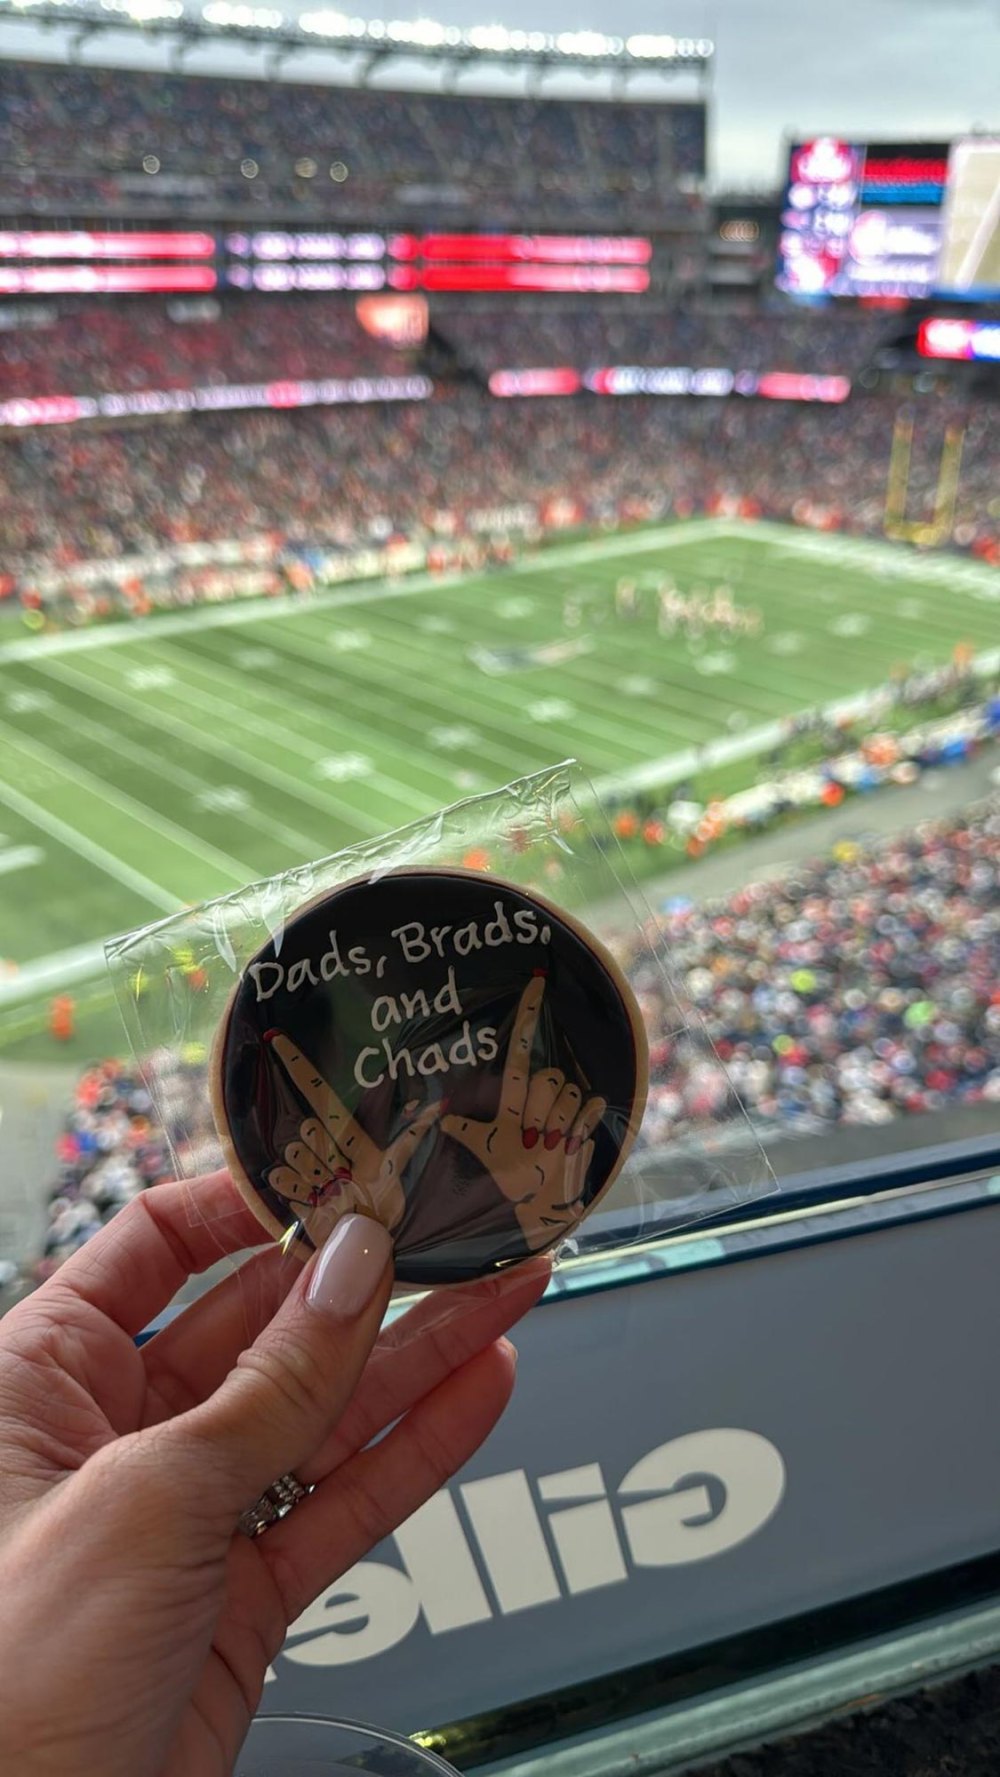 Brittany Mahomes Gifted Dads Brads and Chads Cookie While Attending Chiefs Game With Taylor Swift